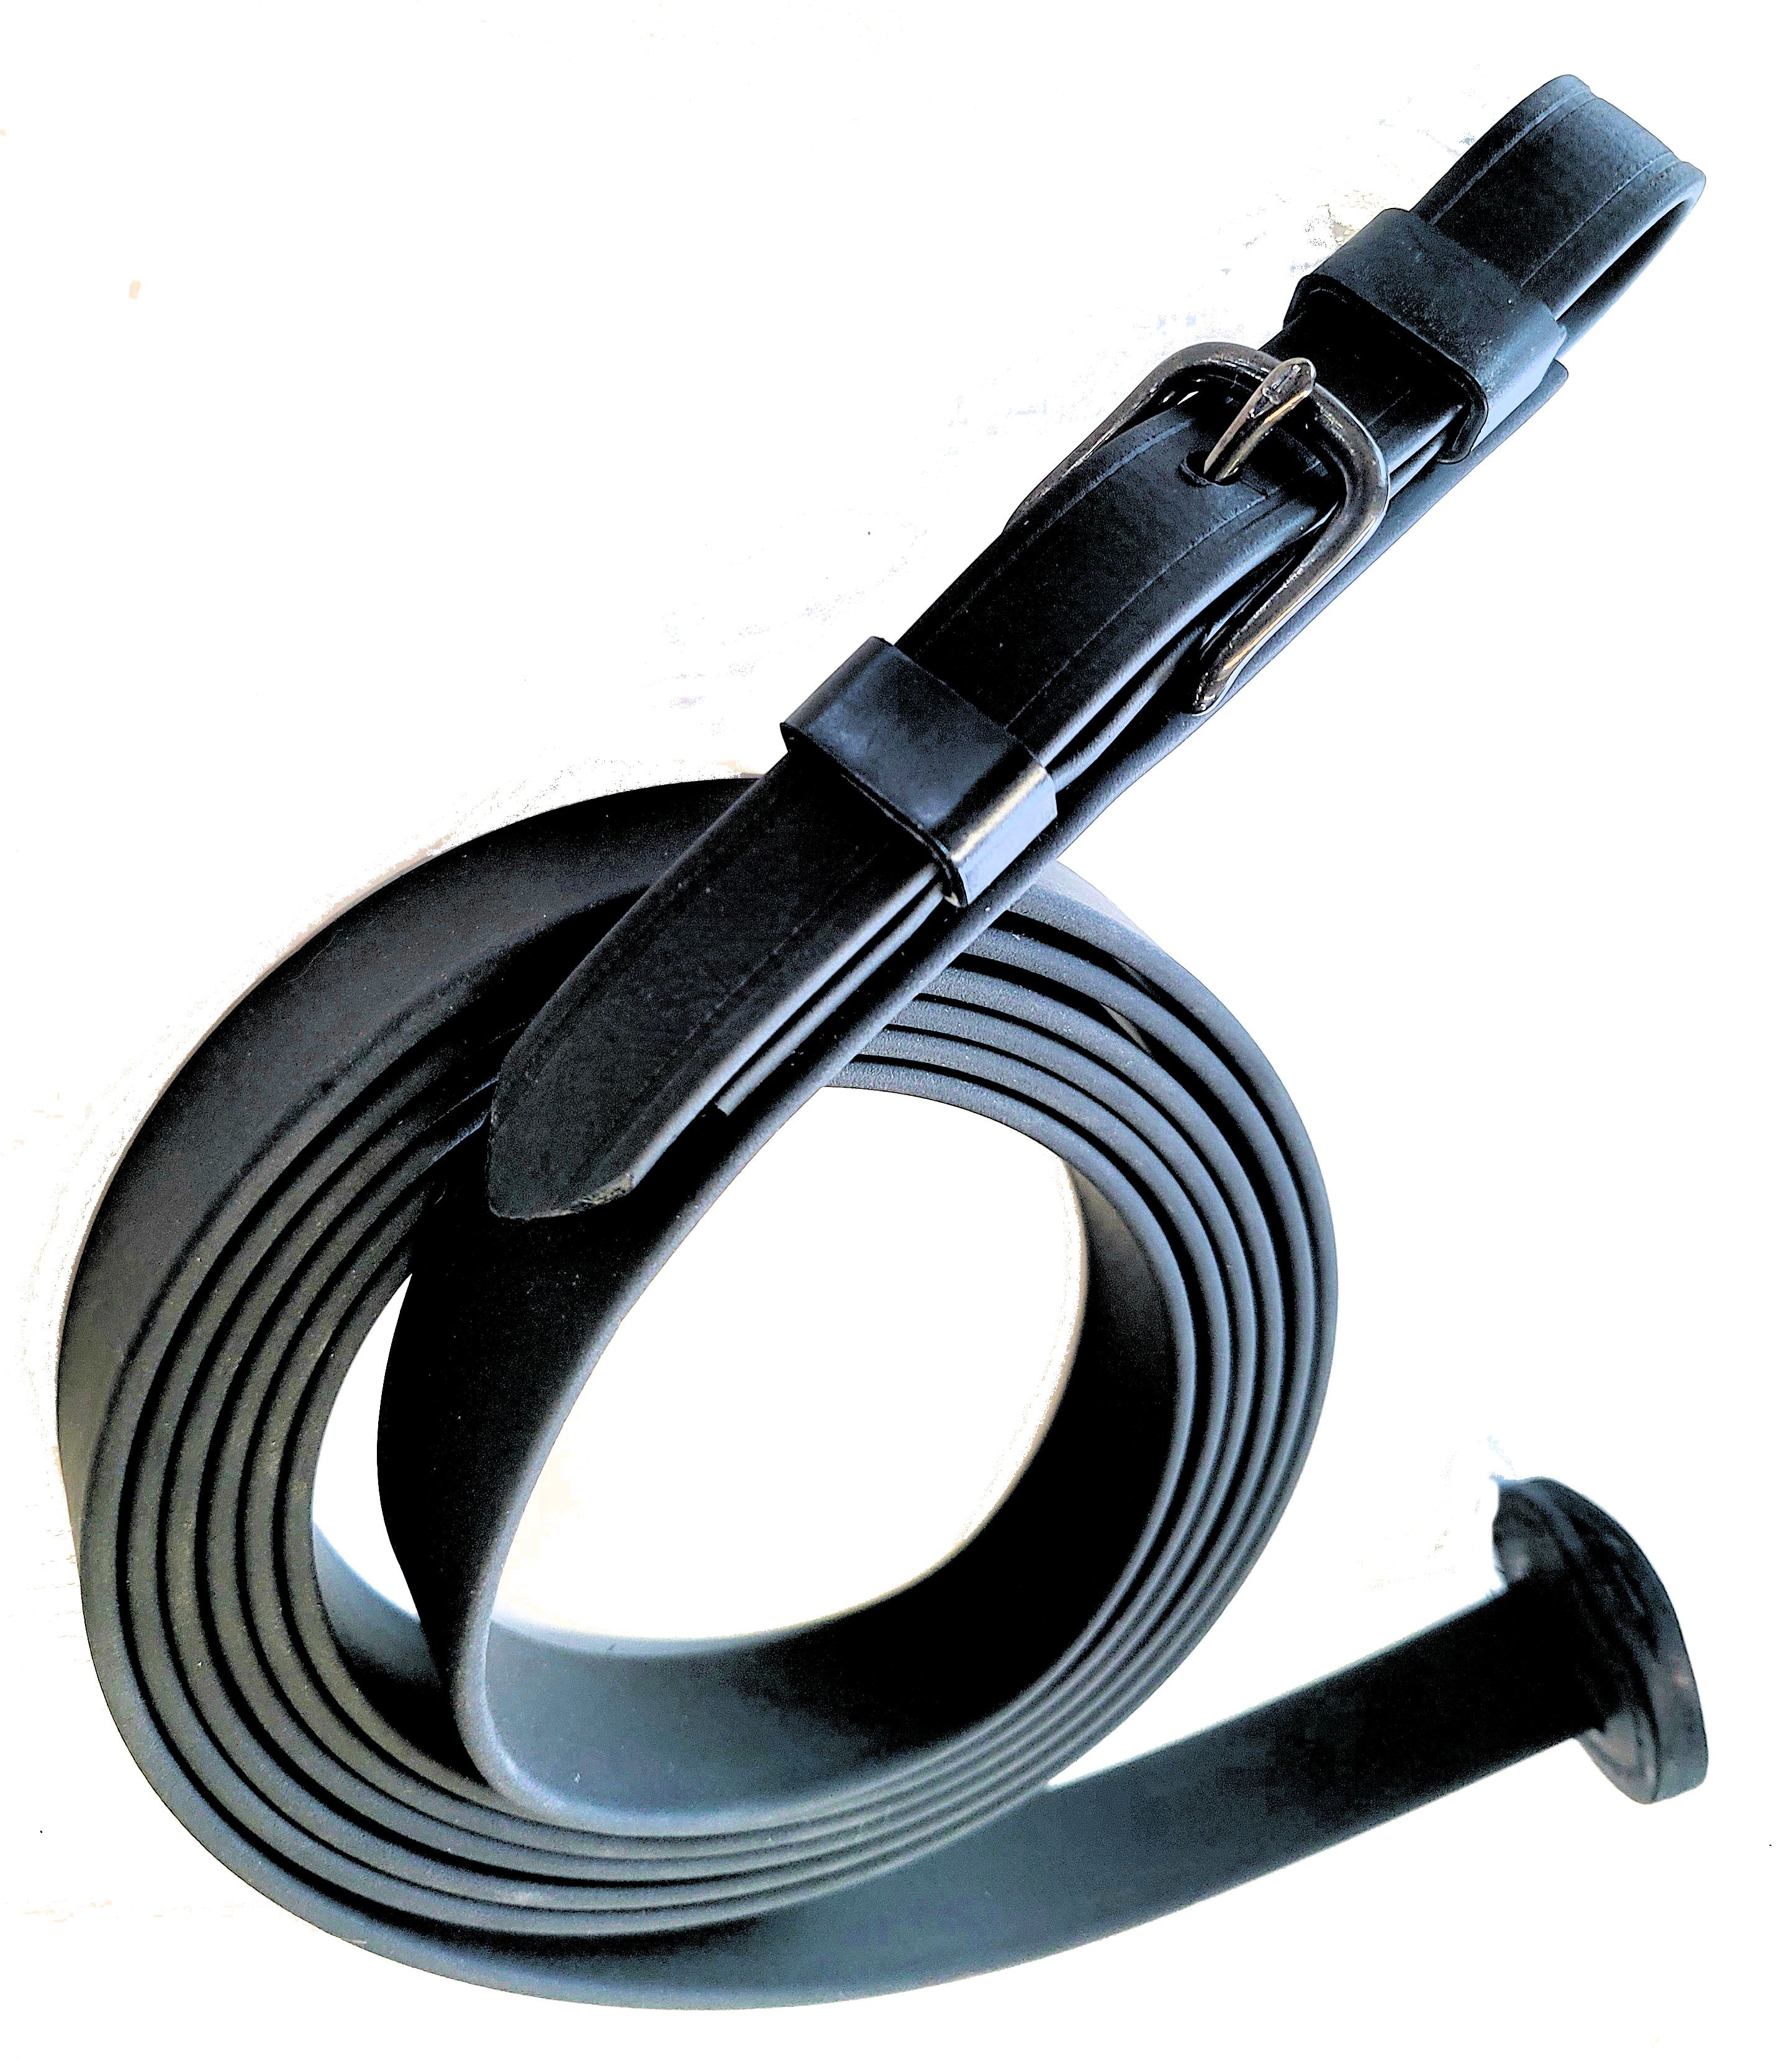 Beta Lead with Buckle - 1" Wide -  Brass, Silver or Black Chrome Buckle